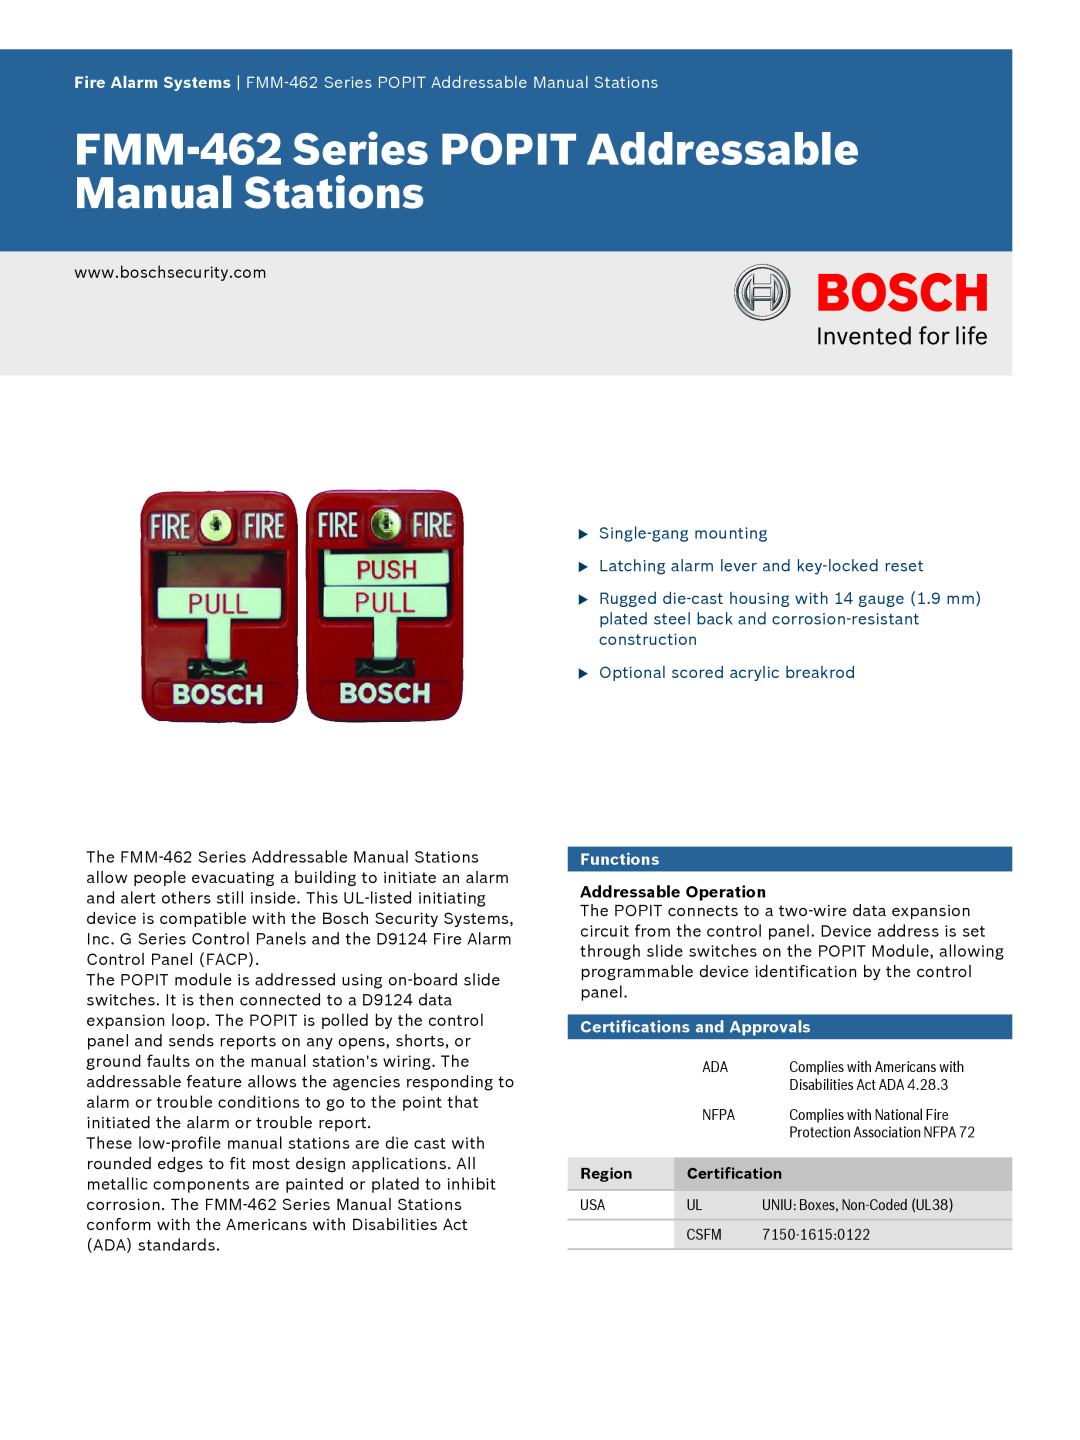 Bosch Appliances FMM462 manual Fire Alarm Systems FMM‑462 Series POPIT Addressable Manual Stations, Functions 